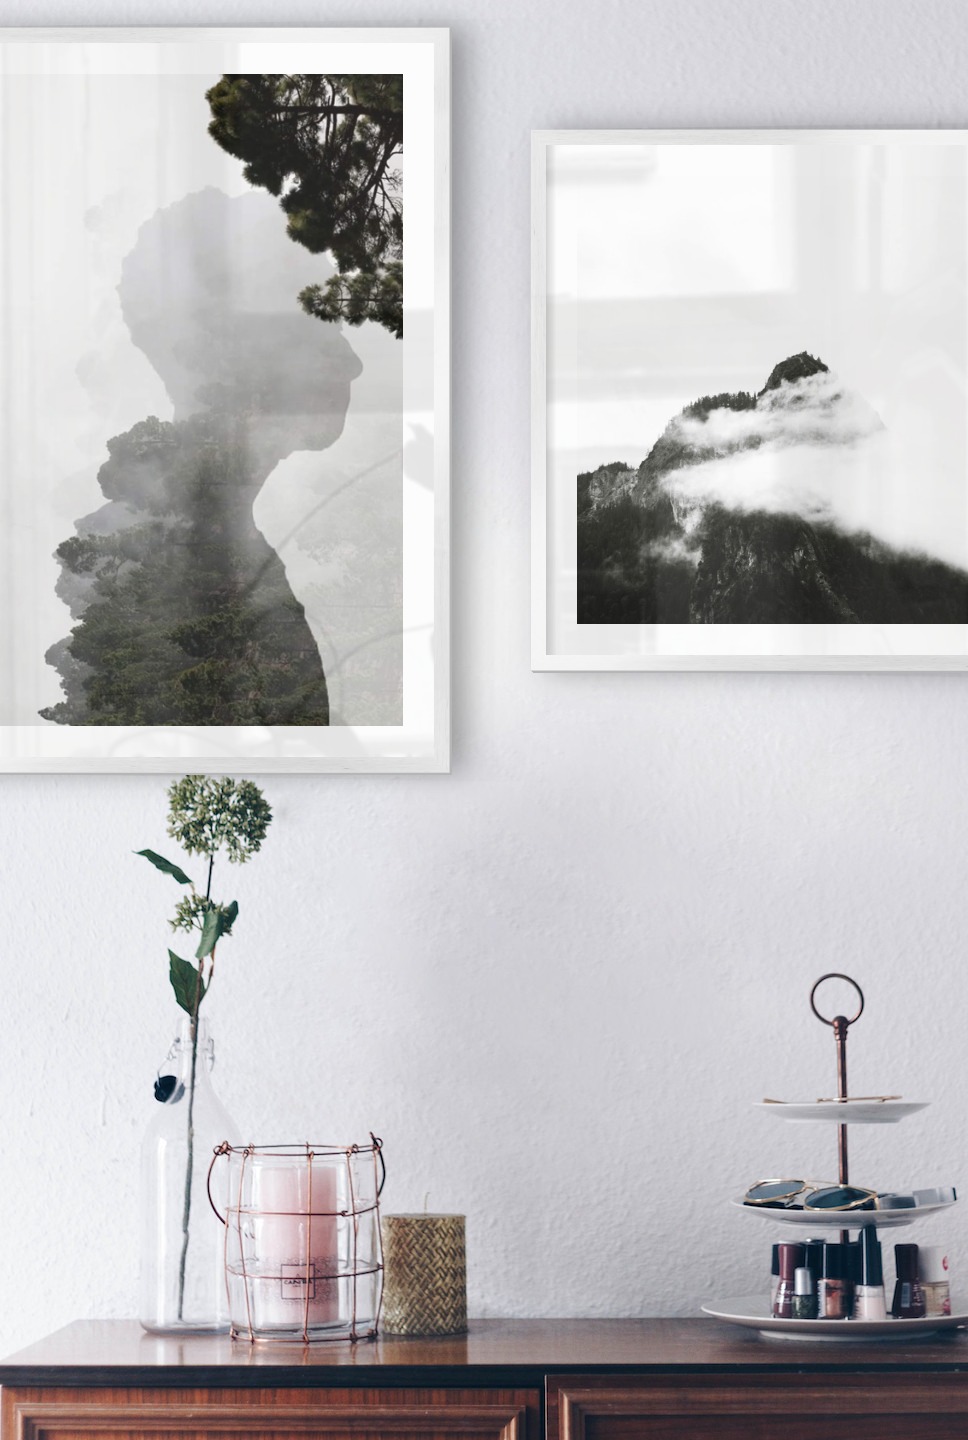 Gallery wall with picture frames in silver in sizes 50x70 and 50x50 with prints "Silhouette and tree" and "Mountain peaks in fog"